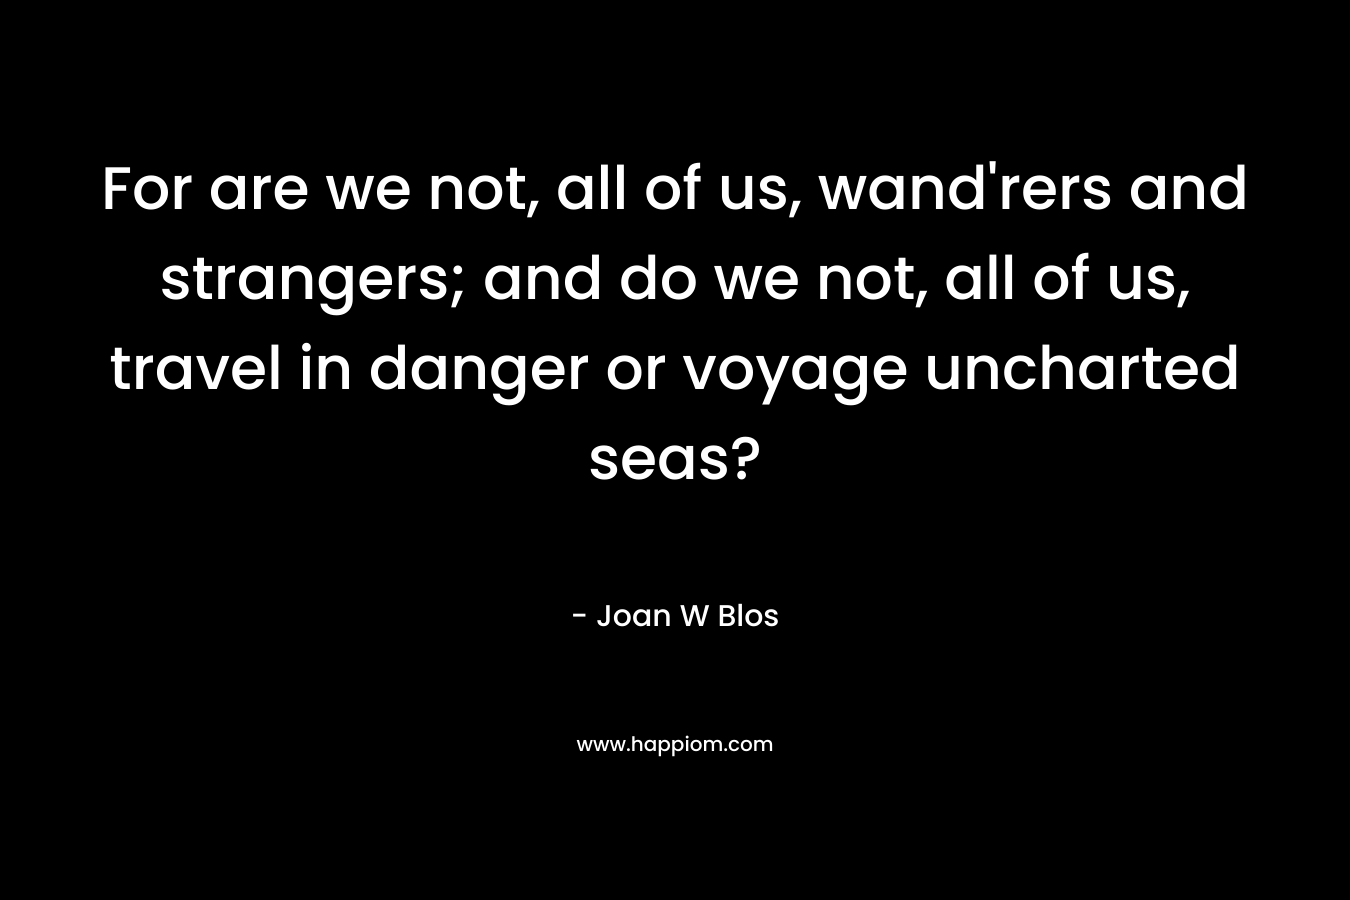 For are we not, all of us, wand’rers and strangers; and do we not, all of us, travel in danger or voyage uncharted seas? – Joan W Blos